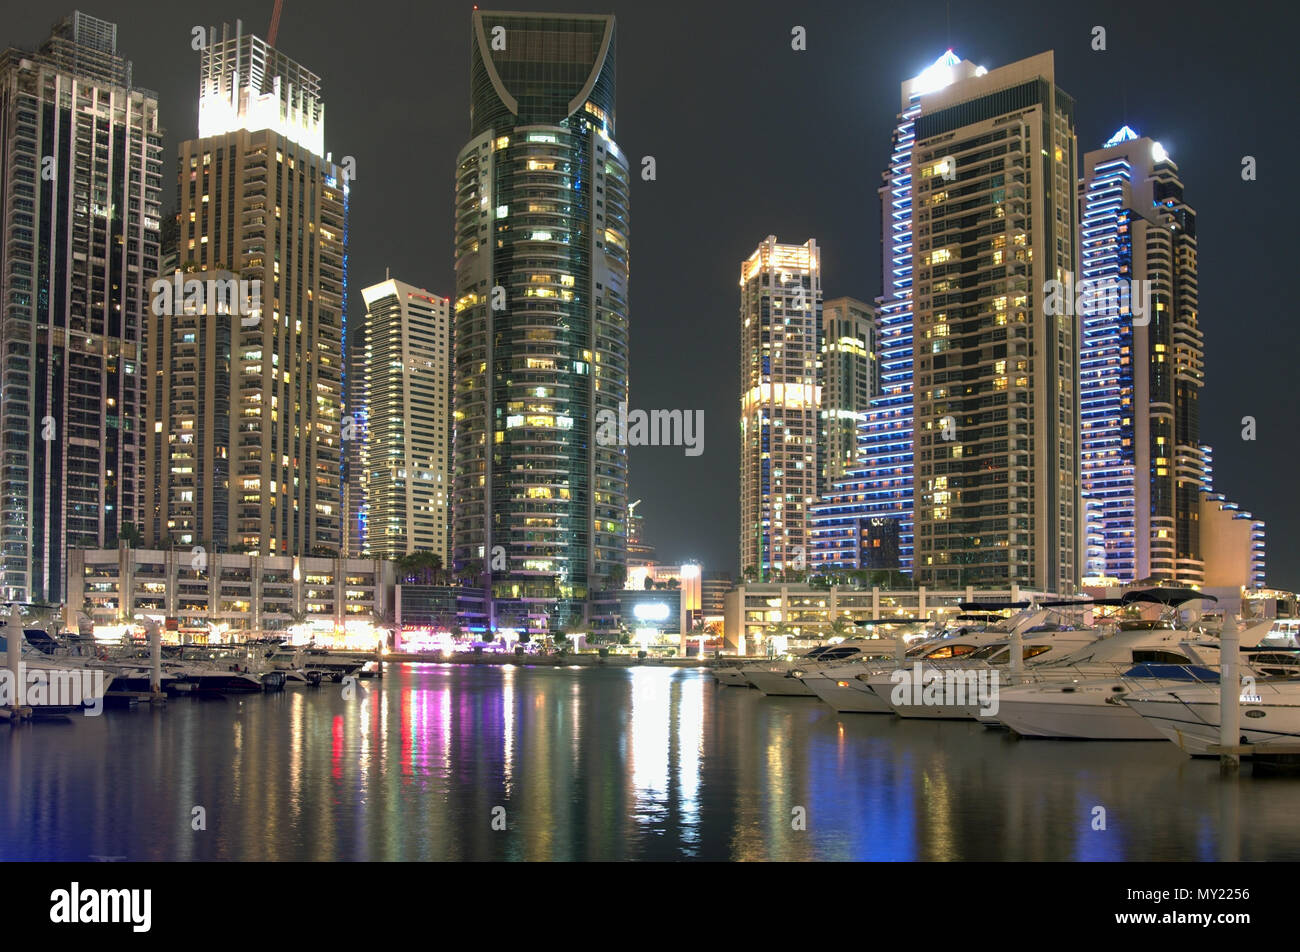 Dubai, United Arab Emirates - May  26, 2018.  High skyscrapers of the business city centers, located near the seaport.  Night time urban landscape Stock Photo